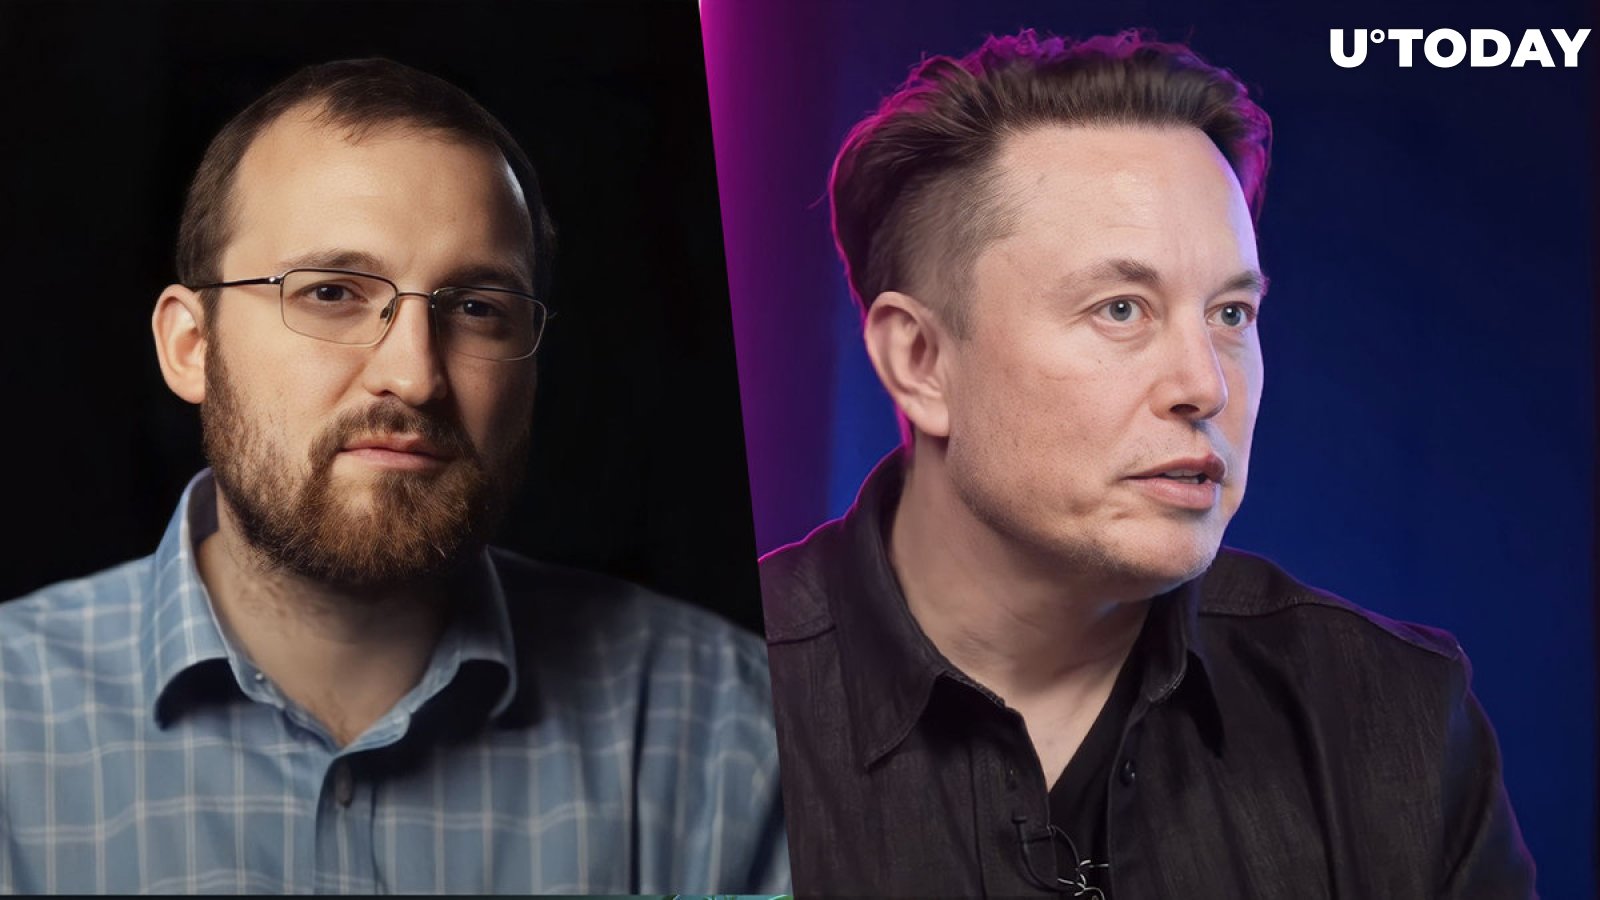 Cardano Founder Awaits 'Big Moment' to Engage With Elon Musk: Details